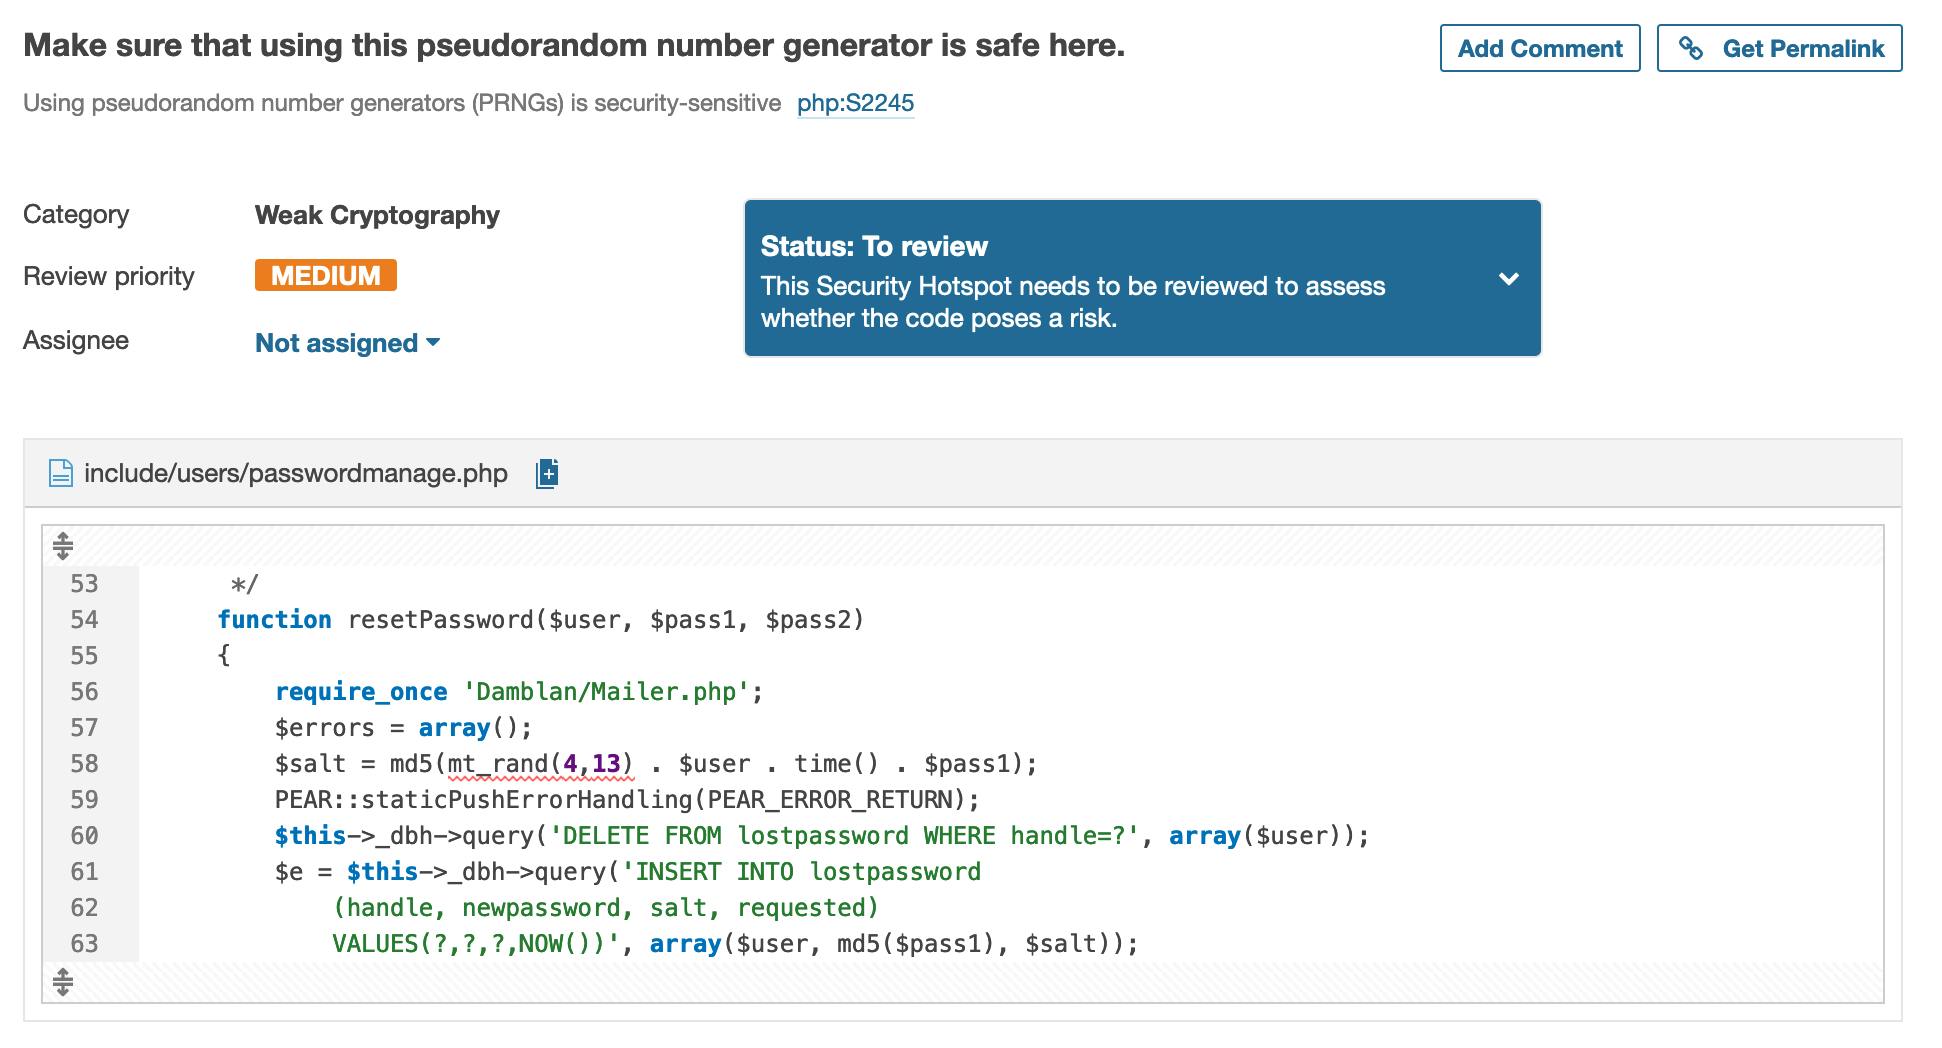 SonarCloud reporting the use of an unsafe number generator in resetPassword()